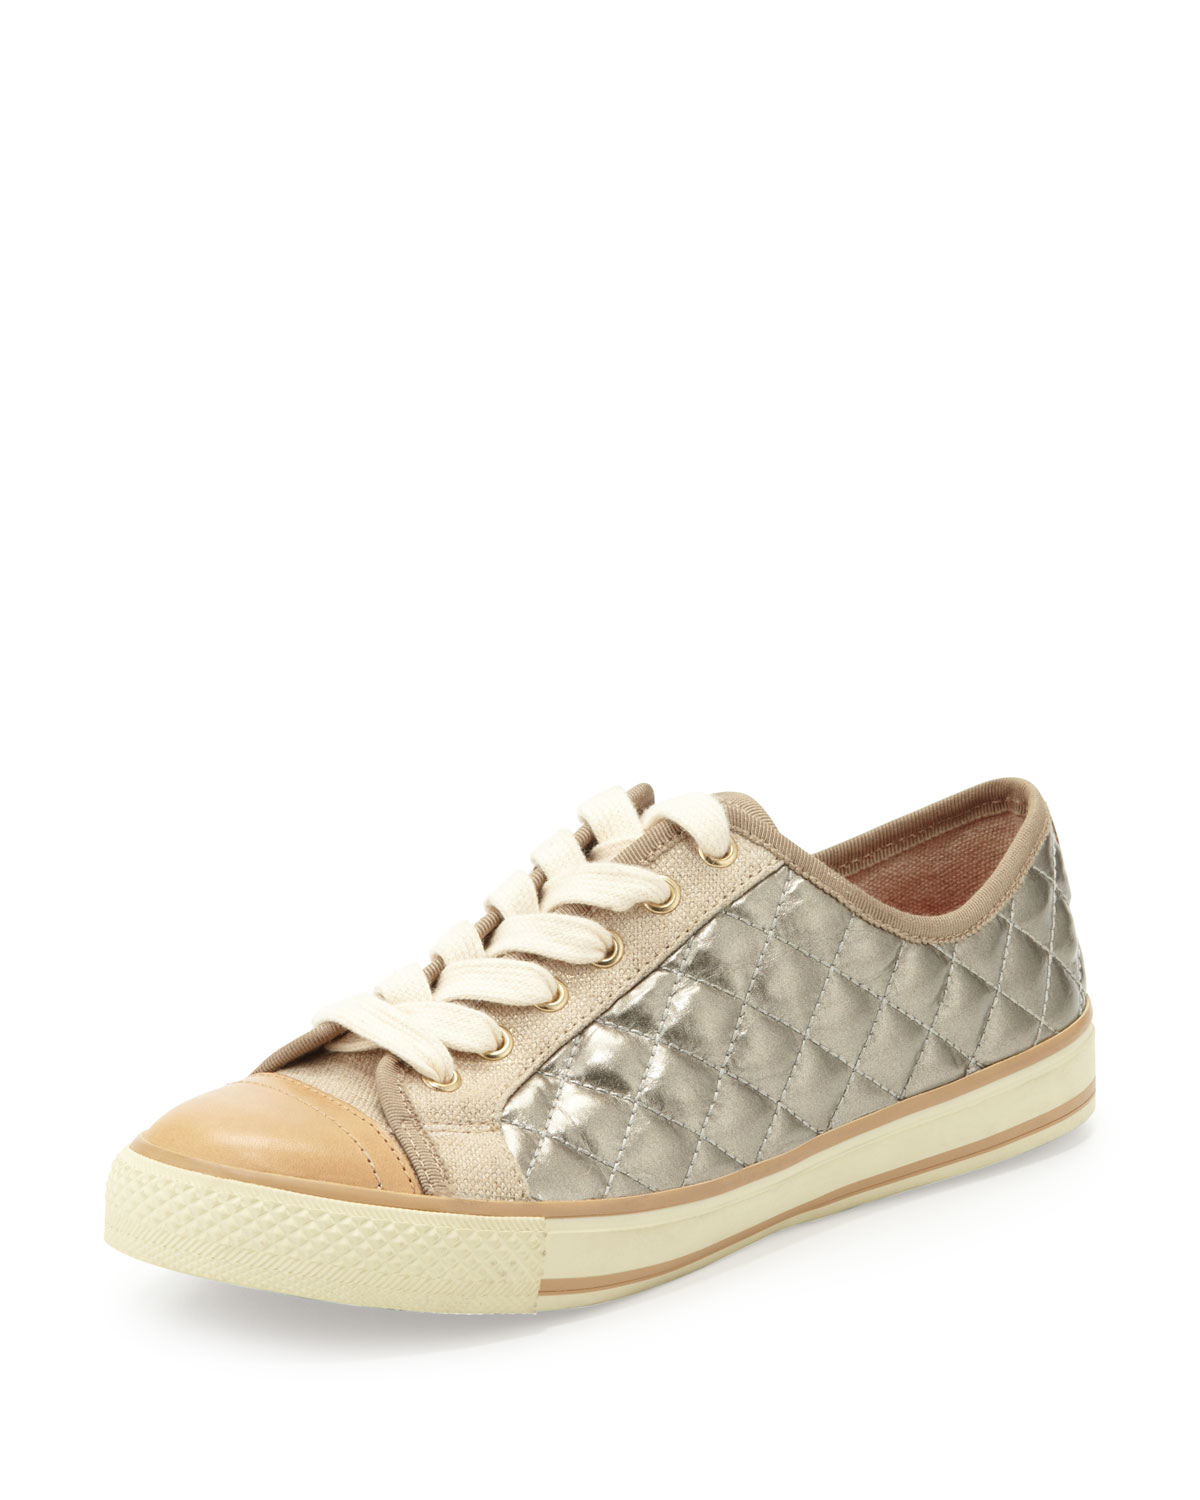 Tory burch Caspe Quilted Leather Sneaker Platinum in Metallic | Lyst